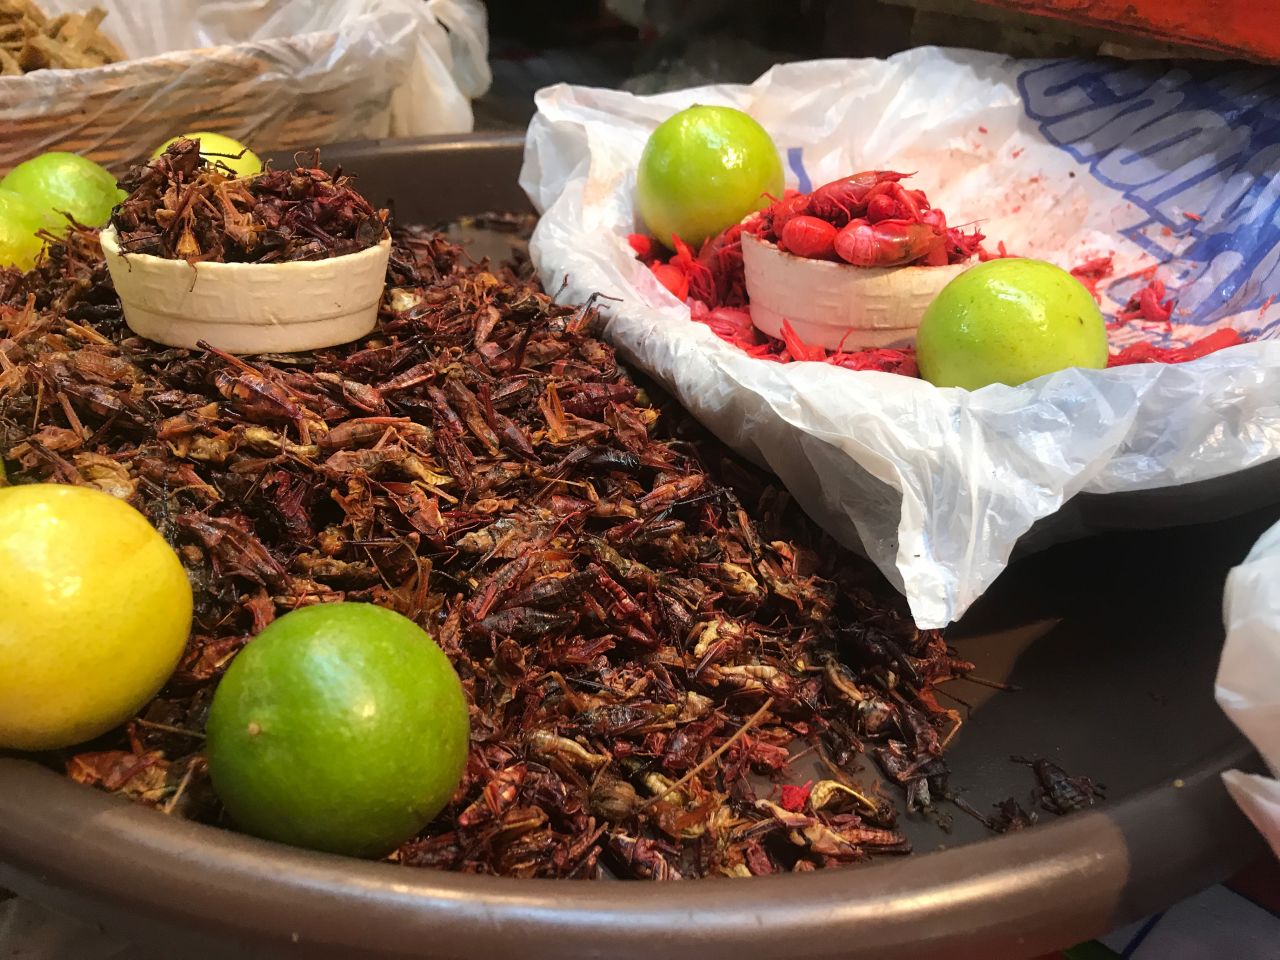 Chapulines -- grasshoppers -- are a tasty snack that has survived since pre-Hispanic times. To the right are acociles, tiny shellfish.